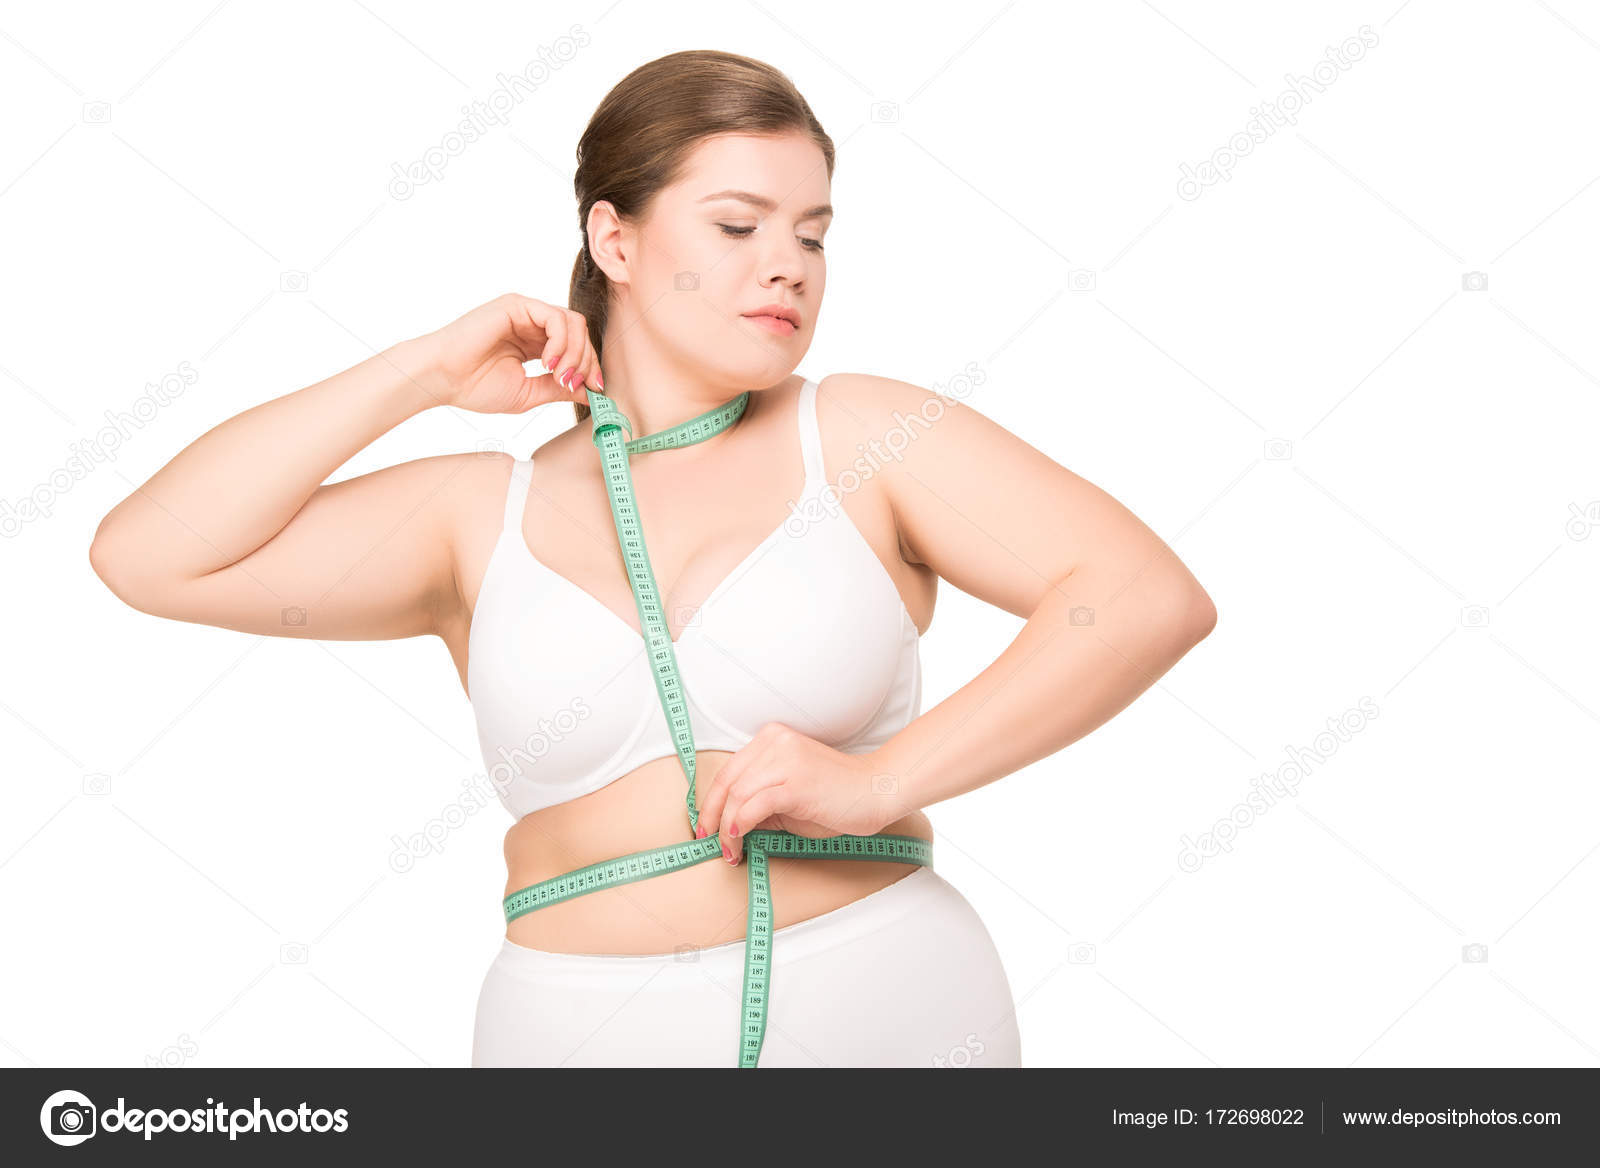 Woman measuring her waist size with a tape measure - StockFreedom - Premium  Stock Photography